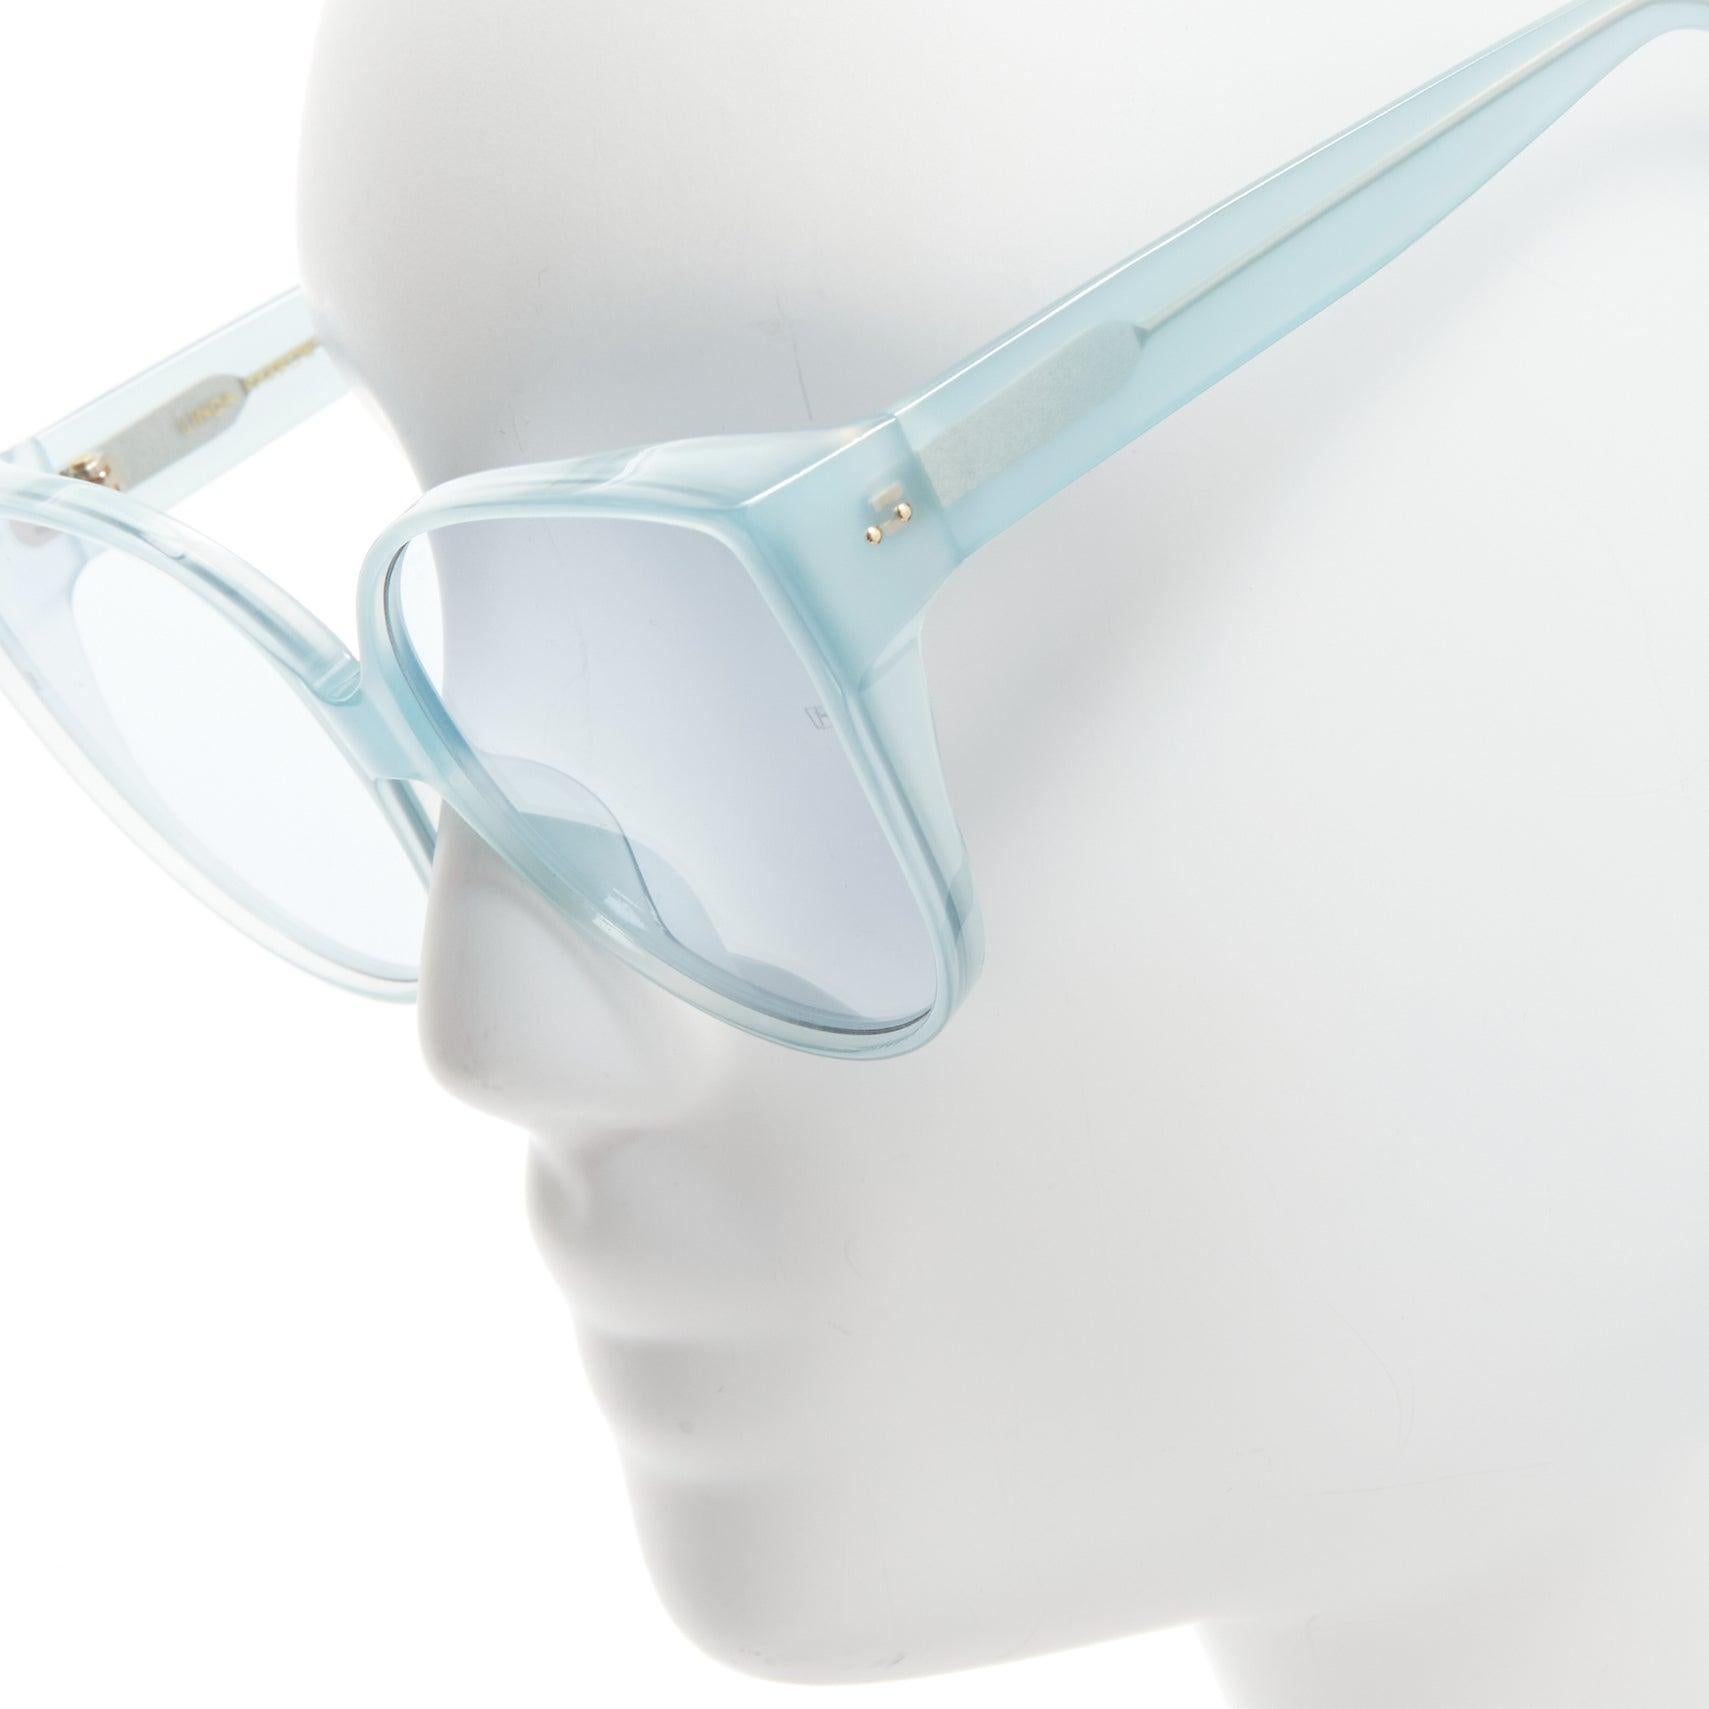 LINDA FARROW LFL656/9 blue acetate clear lens oversized sunglasses
Reference: BSHW/A00092
Brand: Linda Farrow
Model: LFL656/9
Material: Acetate
Color: Blue
Pattern: Solid
Closure: Pull On
Lining: Blue Acetate
Made in: Japan

CONDITION:
Condition: